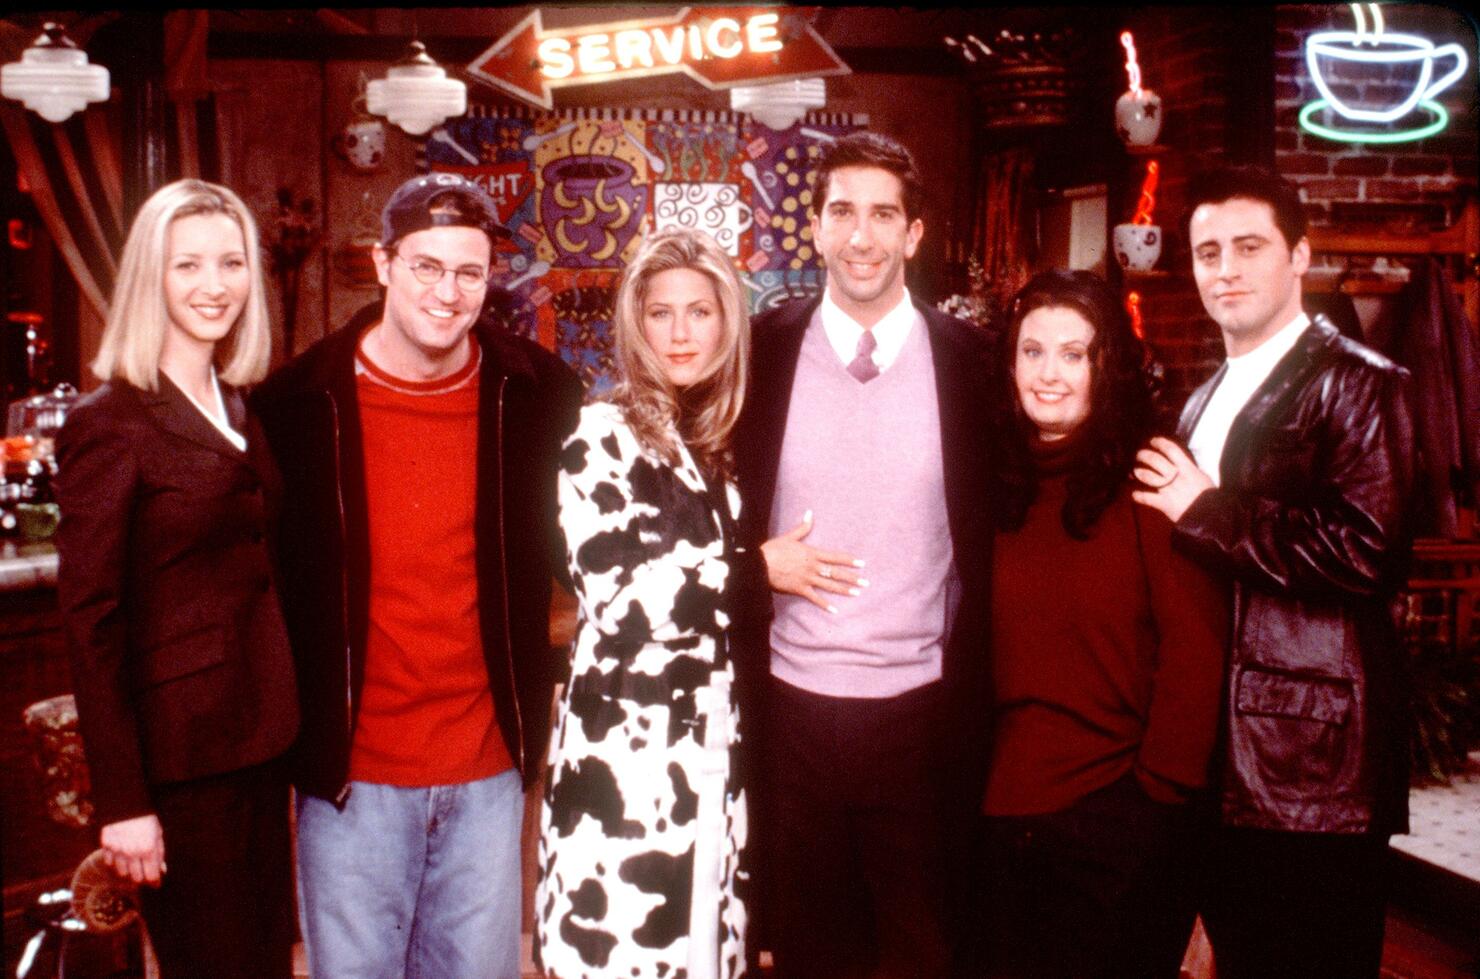 The One Where Friends Has a Reunion Episode